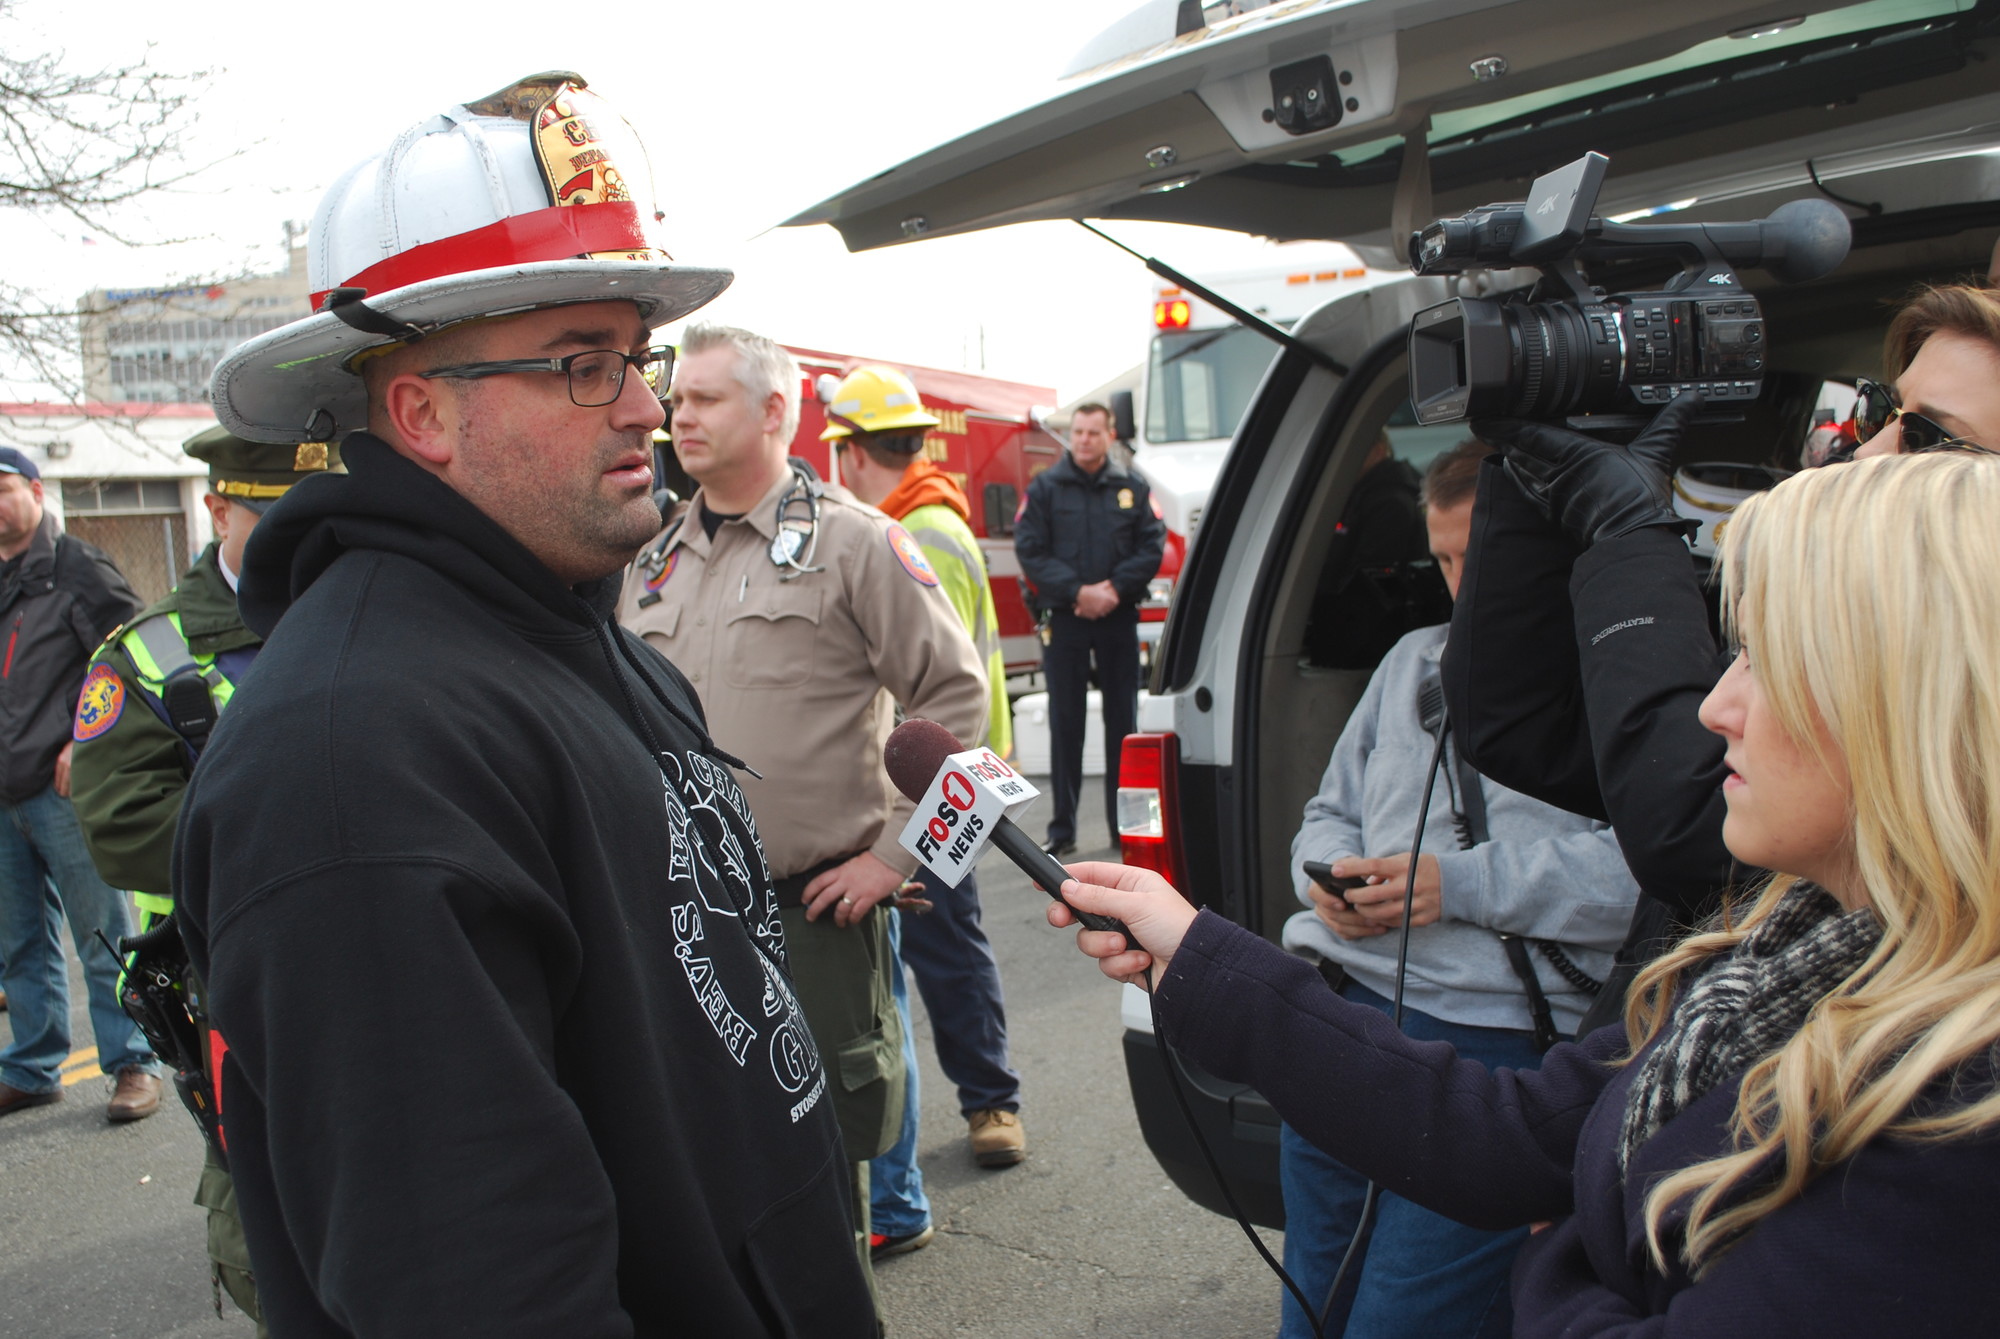 Chief Peter Lillie from the West Hempstead Fire Department was interviewed by News 12.